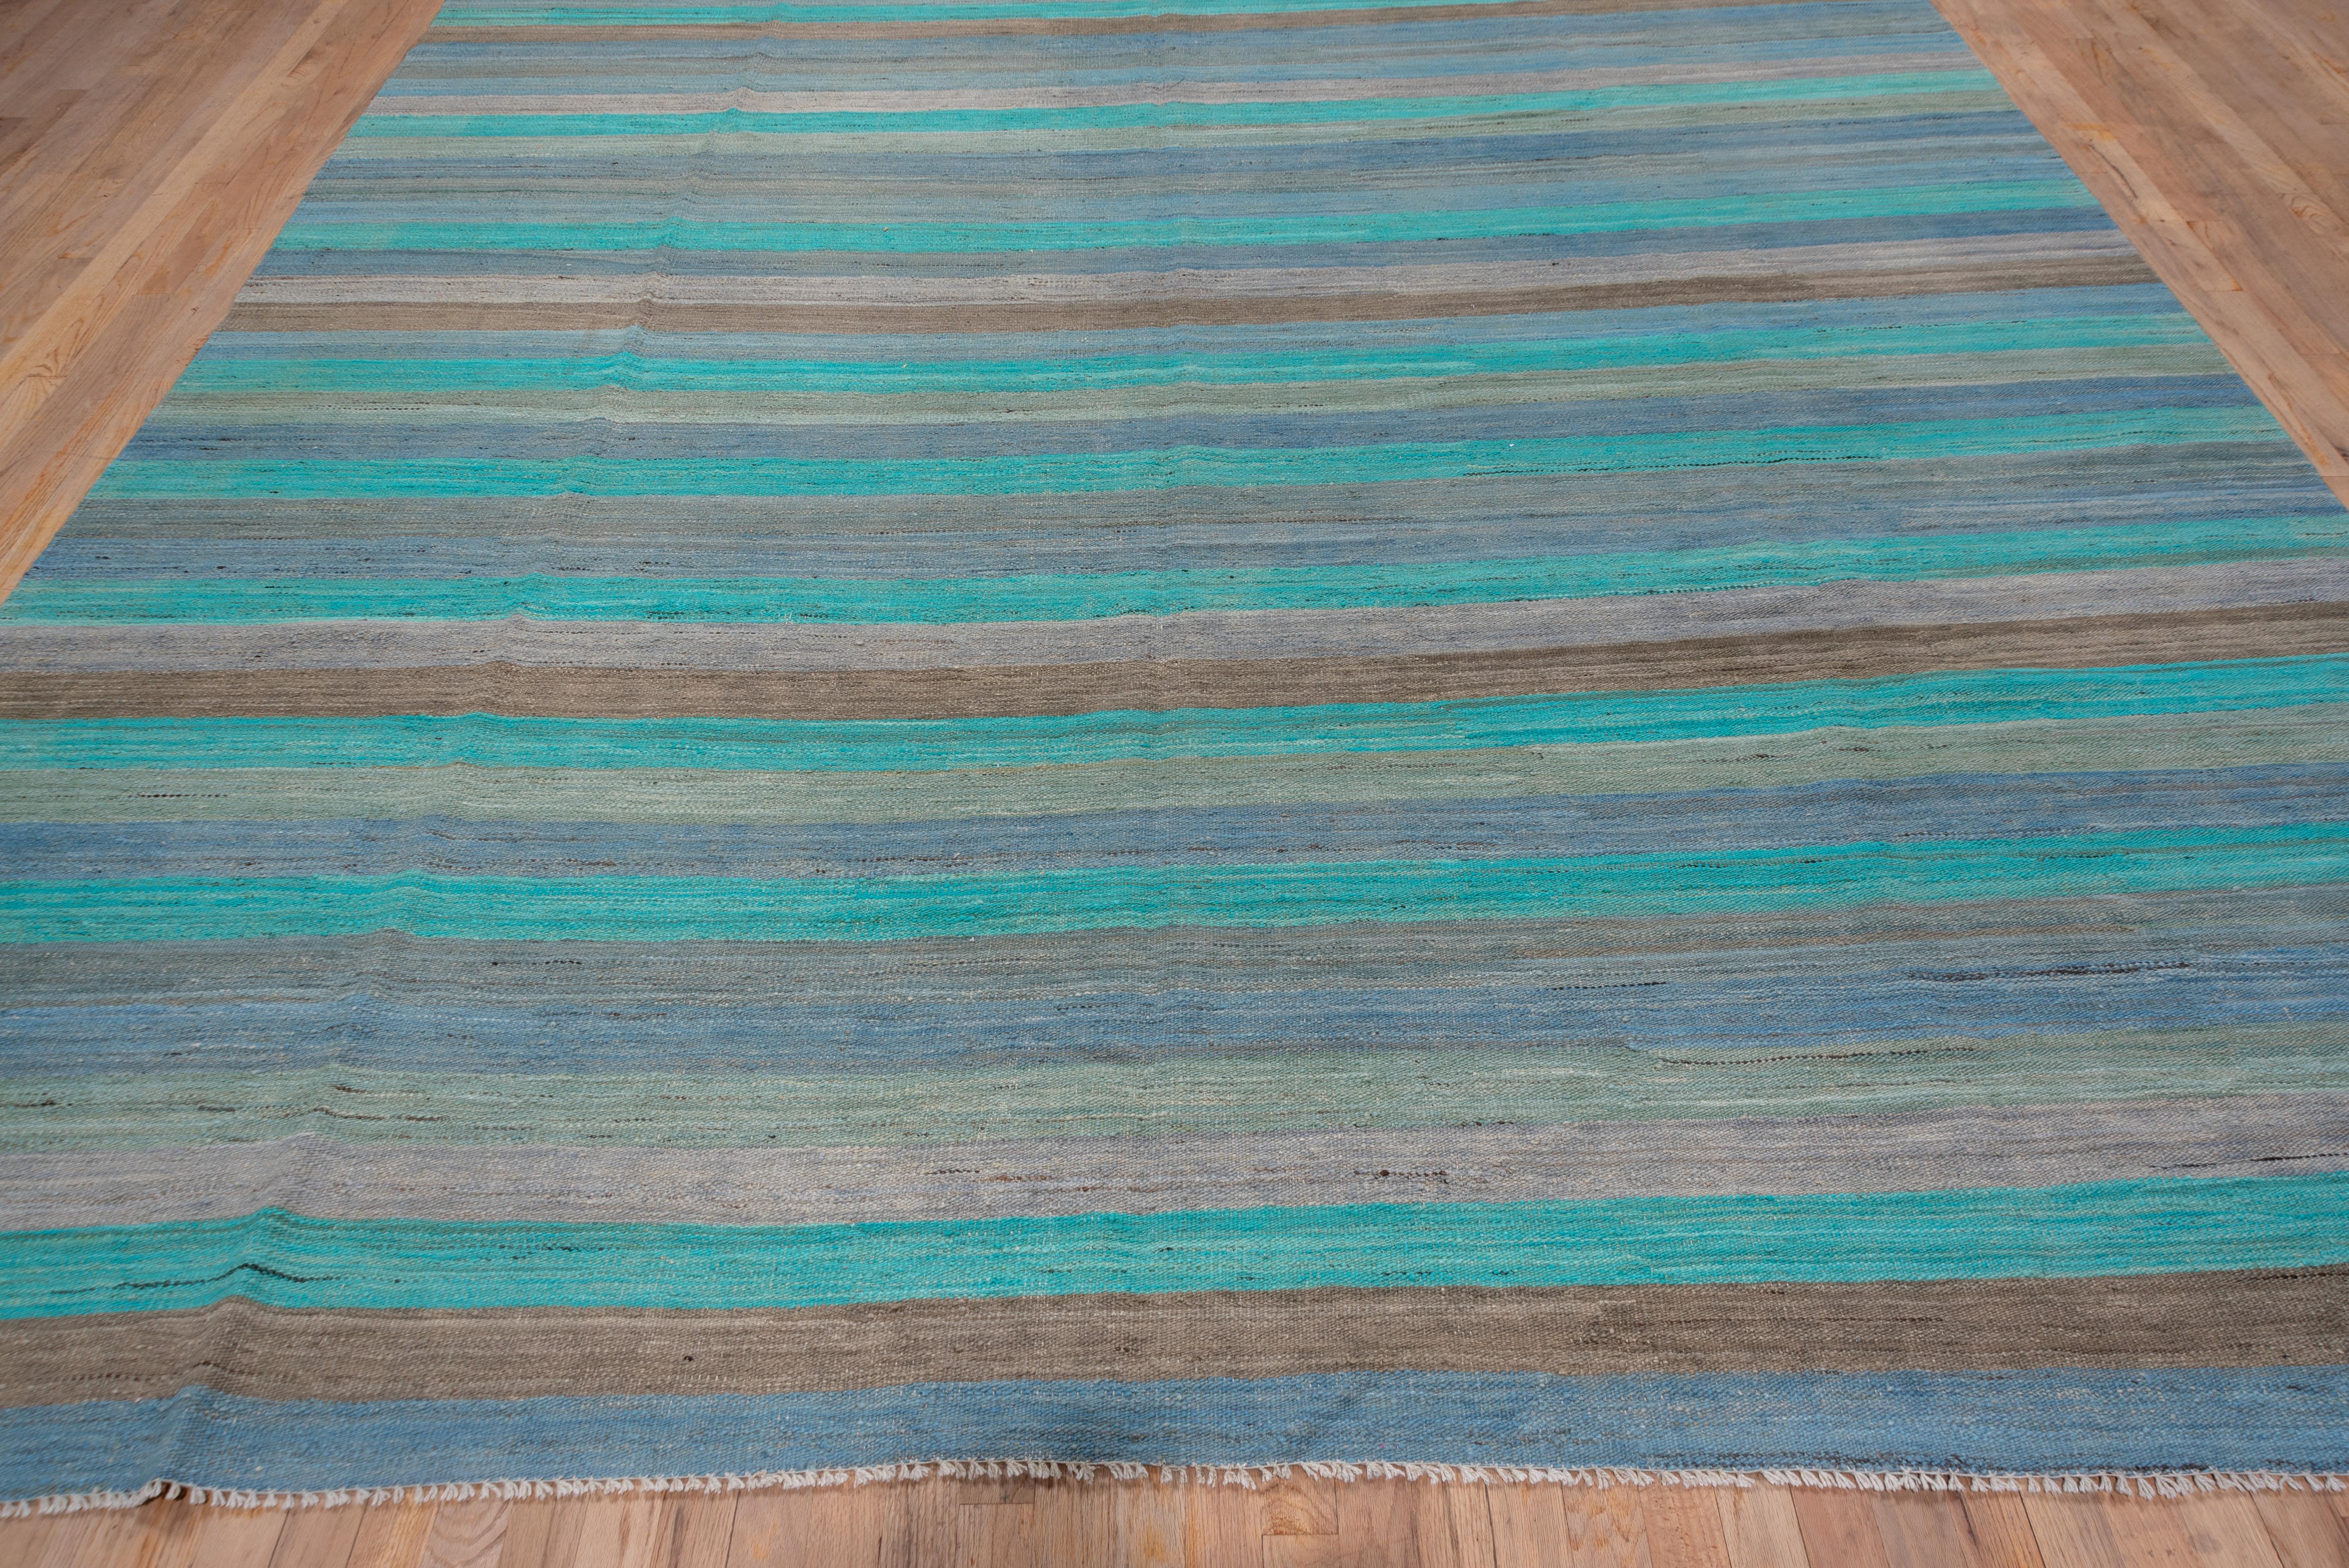 Afghan Contemporary Striped Flatweave Area Rug, Blue, Light Sea Green & Brown Tones For Sale